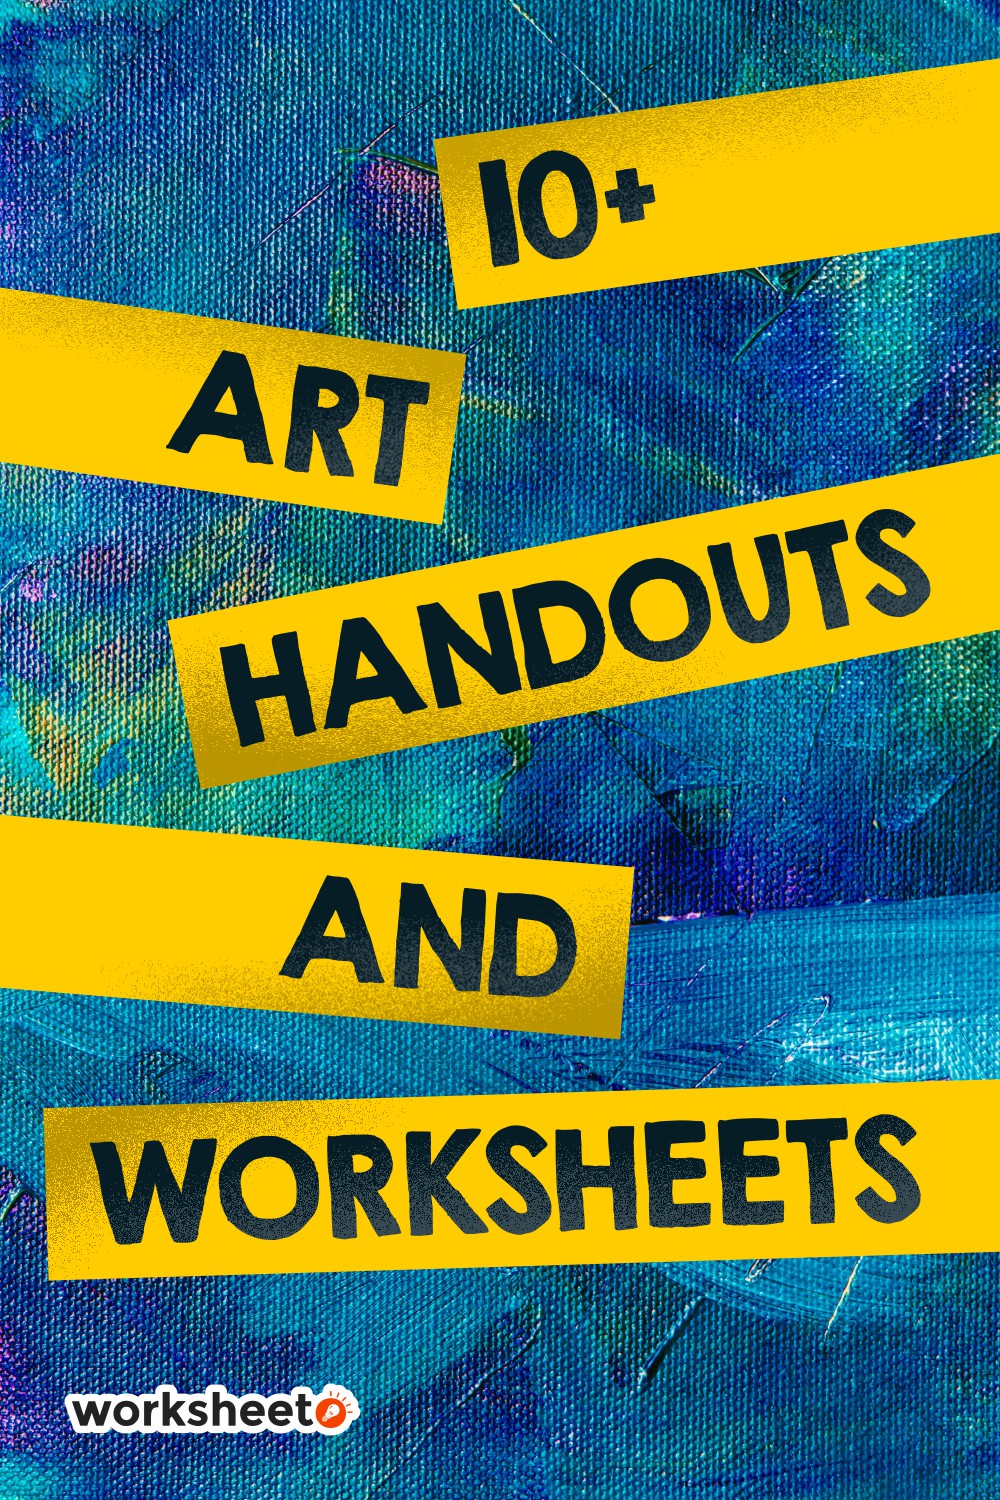 19 Images of Art Handouts And Worksheets